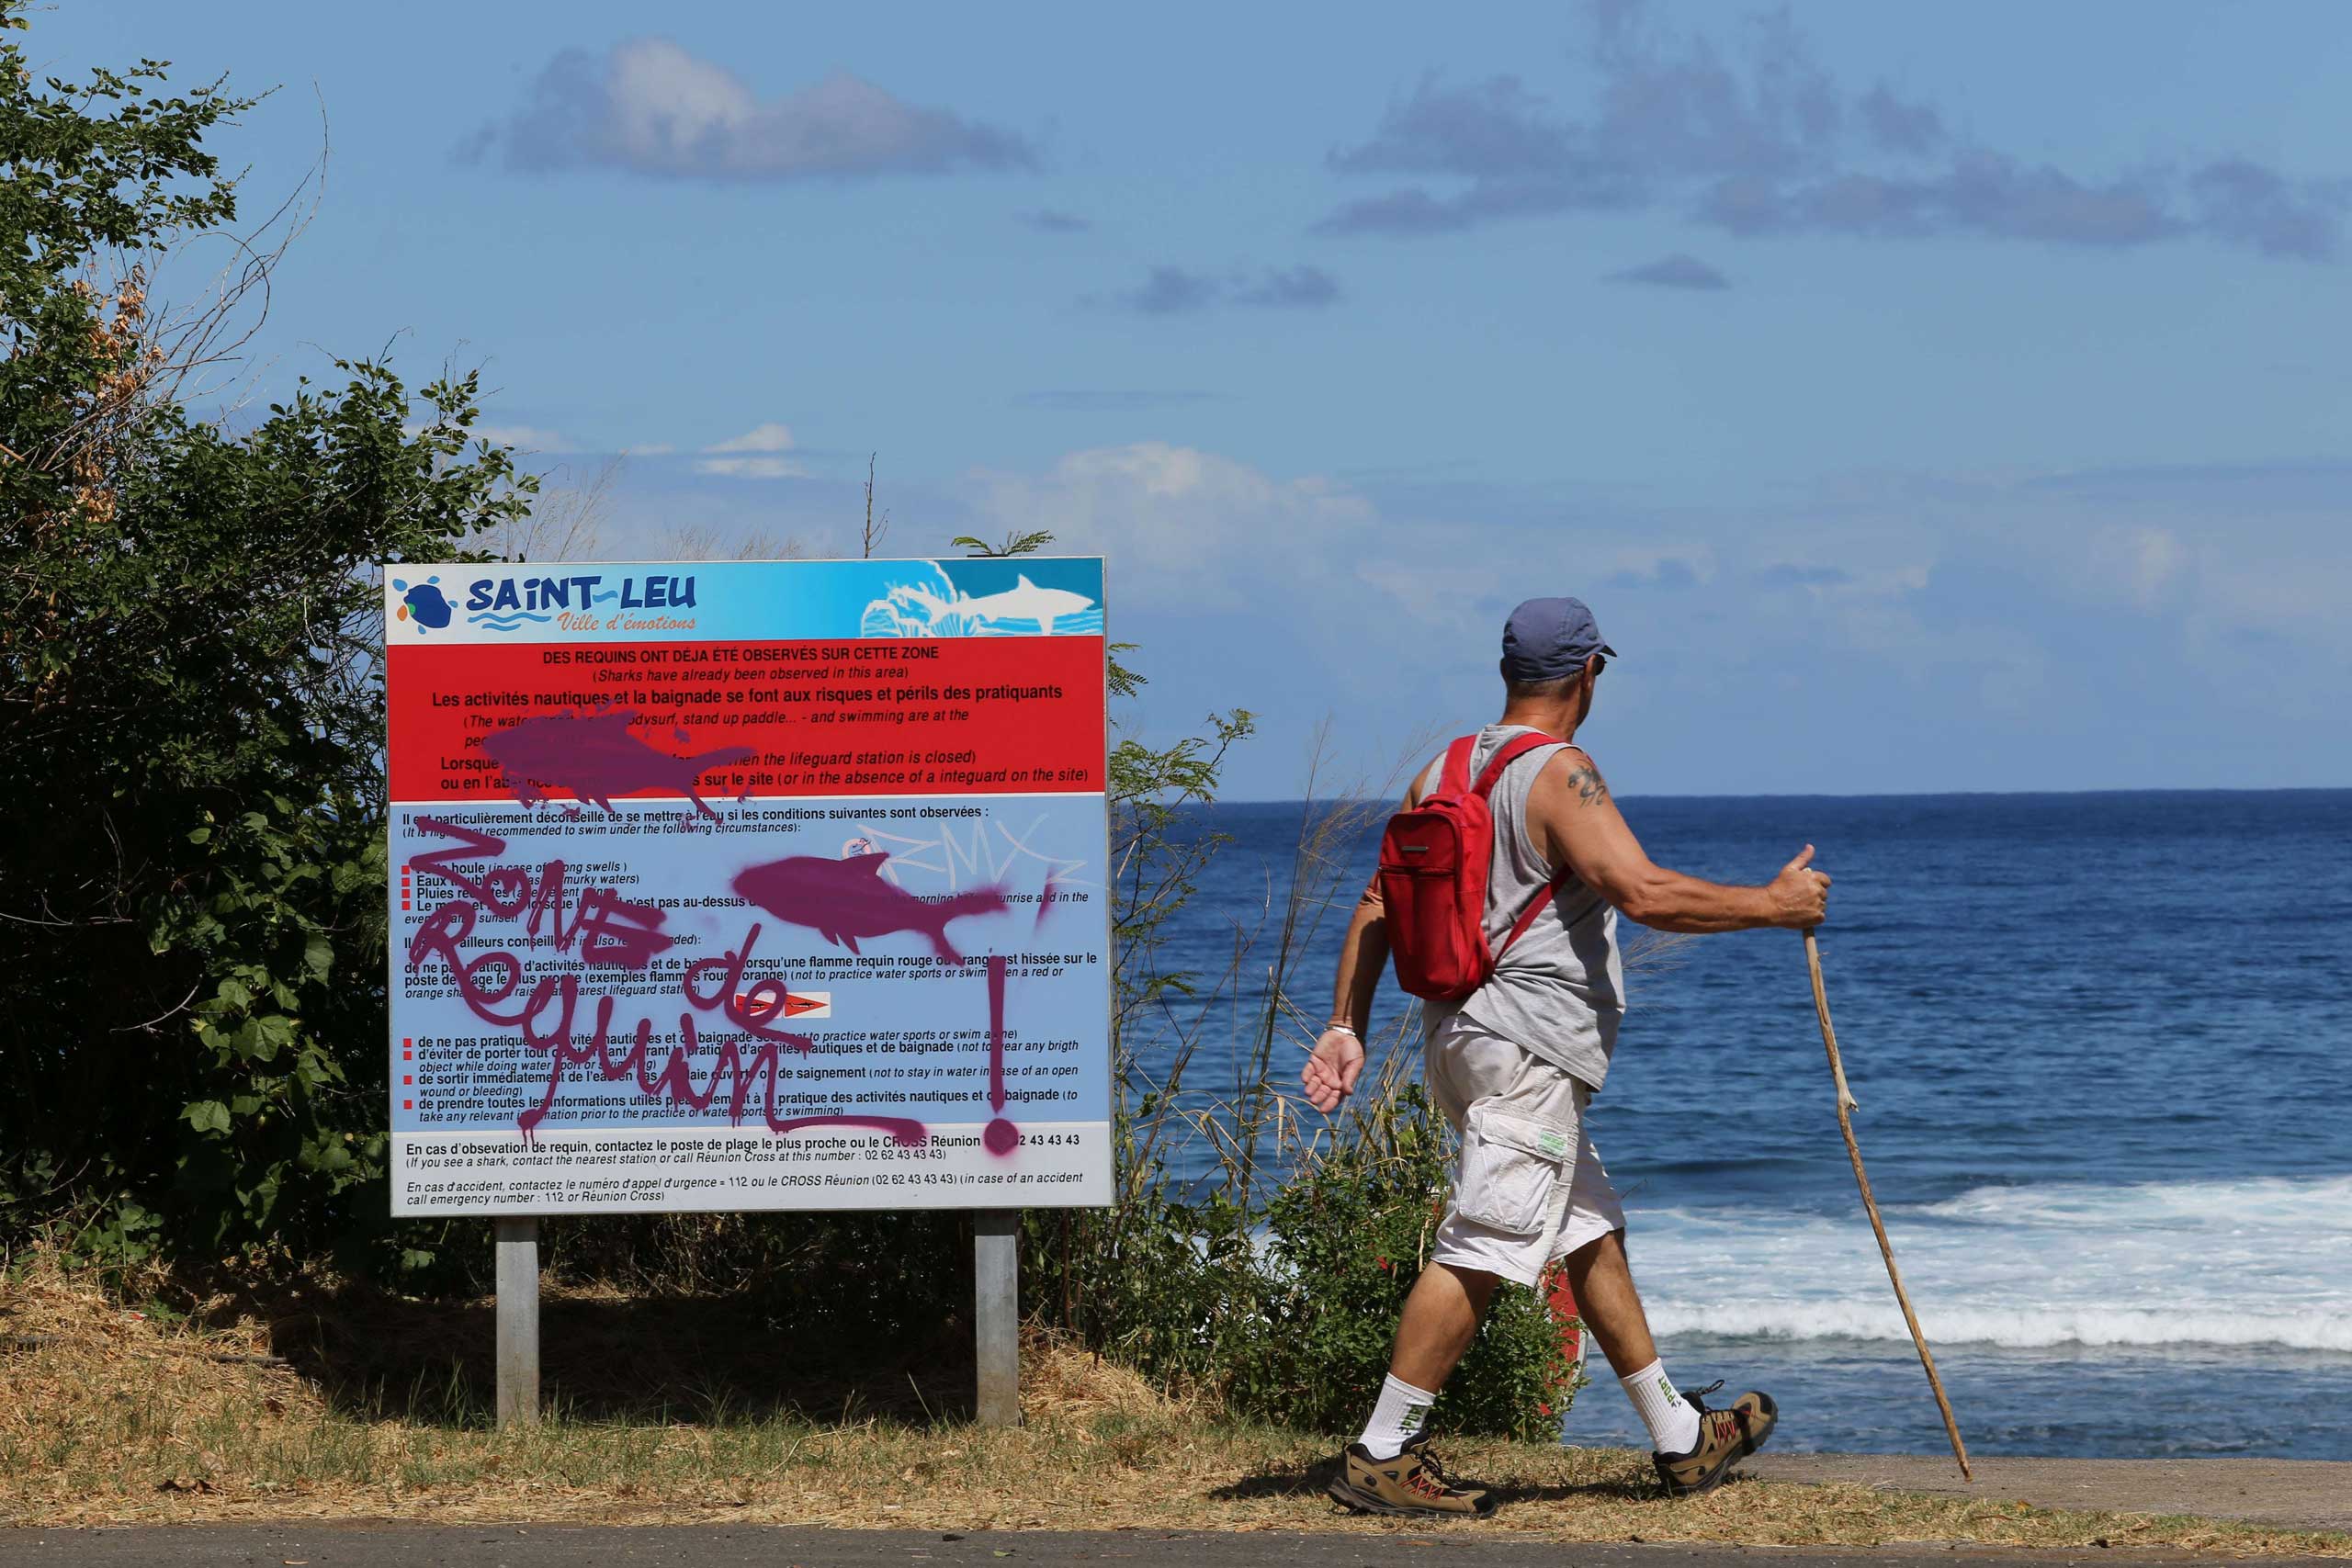 A graffiti reading "Shark's area" has been written on an information board, on April 14, 2015 off Saint-Leu, on the western coast of the French Indian Ocean island of La Reunion, two days after a 13-year-old Elio Canestri was attacked and killed by a shark. (Richard Bouhet—AFP/Getty Images)